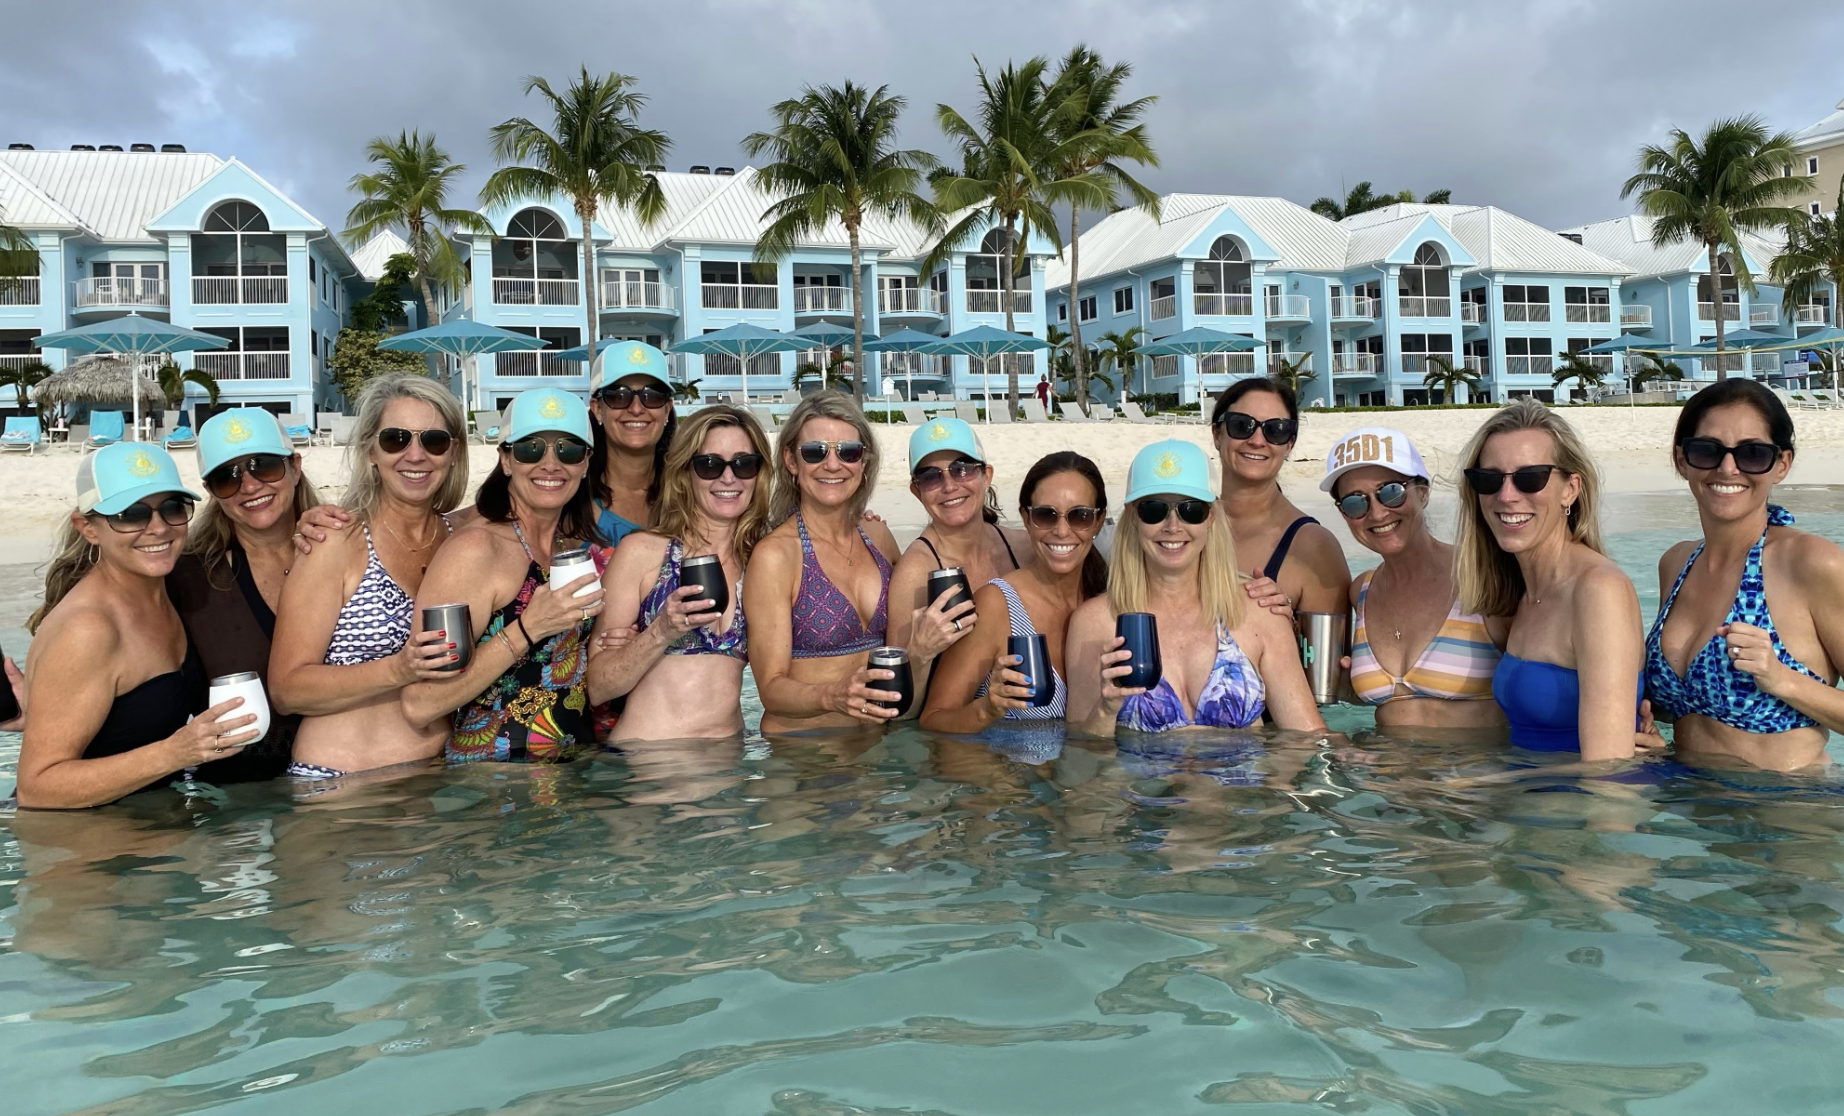 Group of women on annual vacation together, standing in front of a resort waist deep in clear blue water